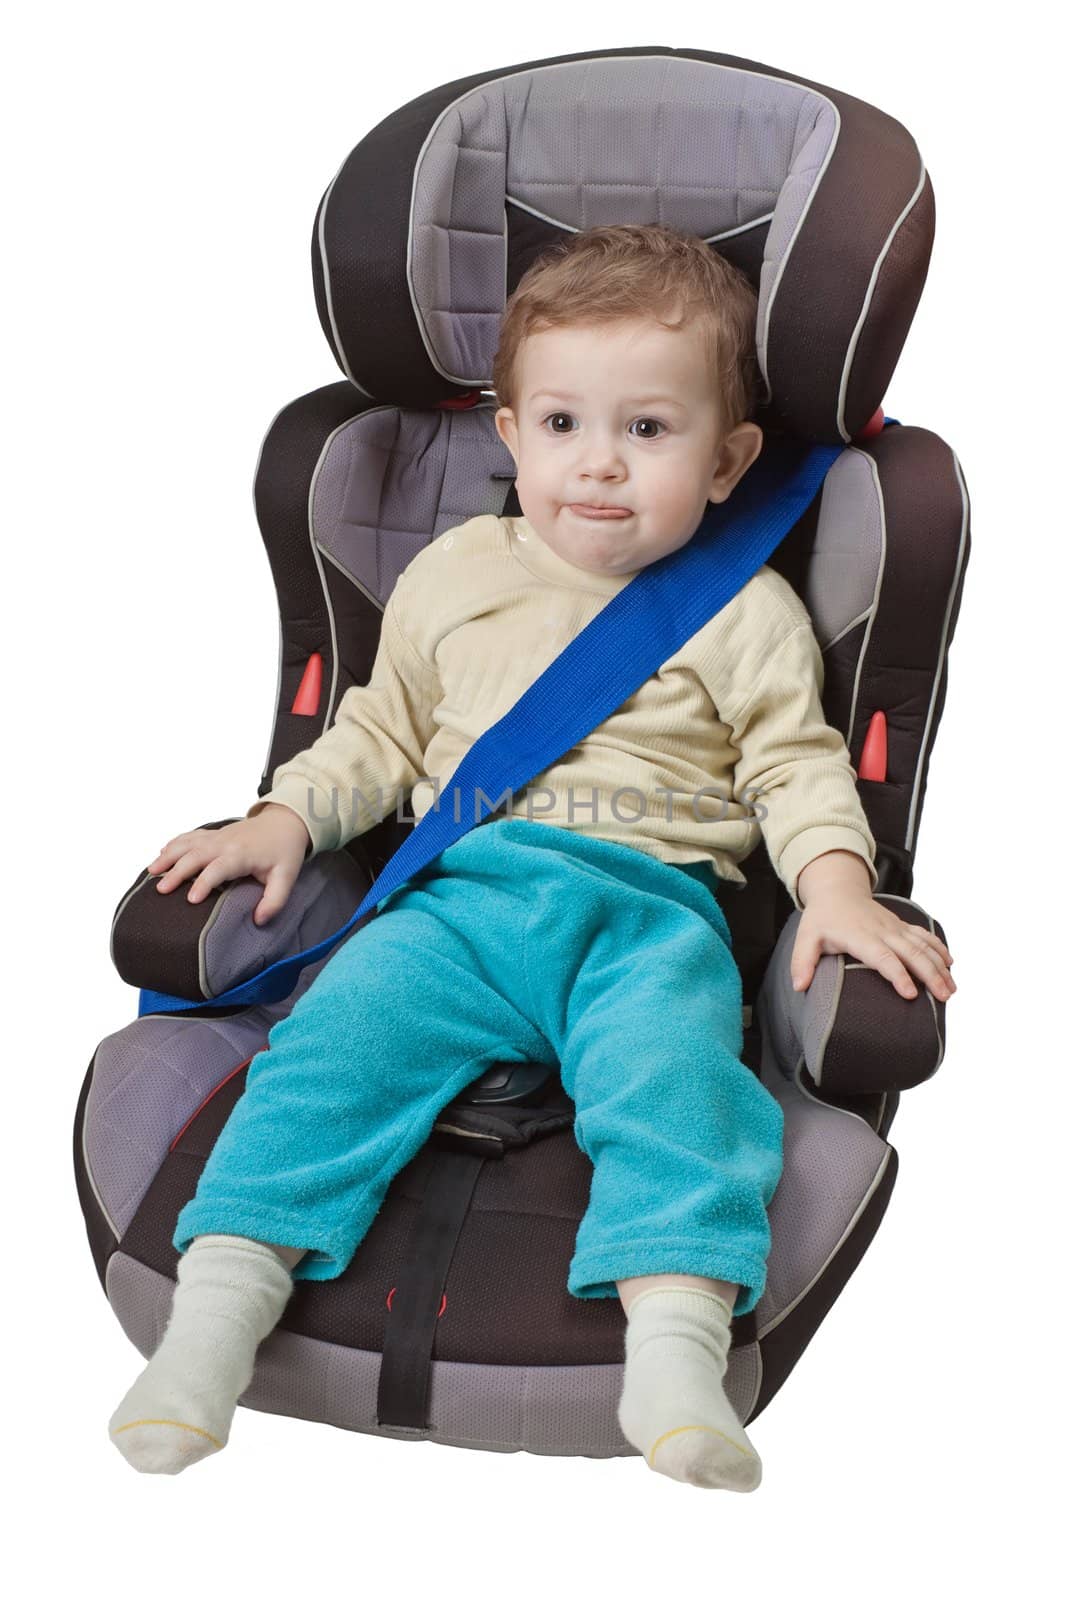 Little child on vehicle car safety seat with belt